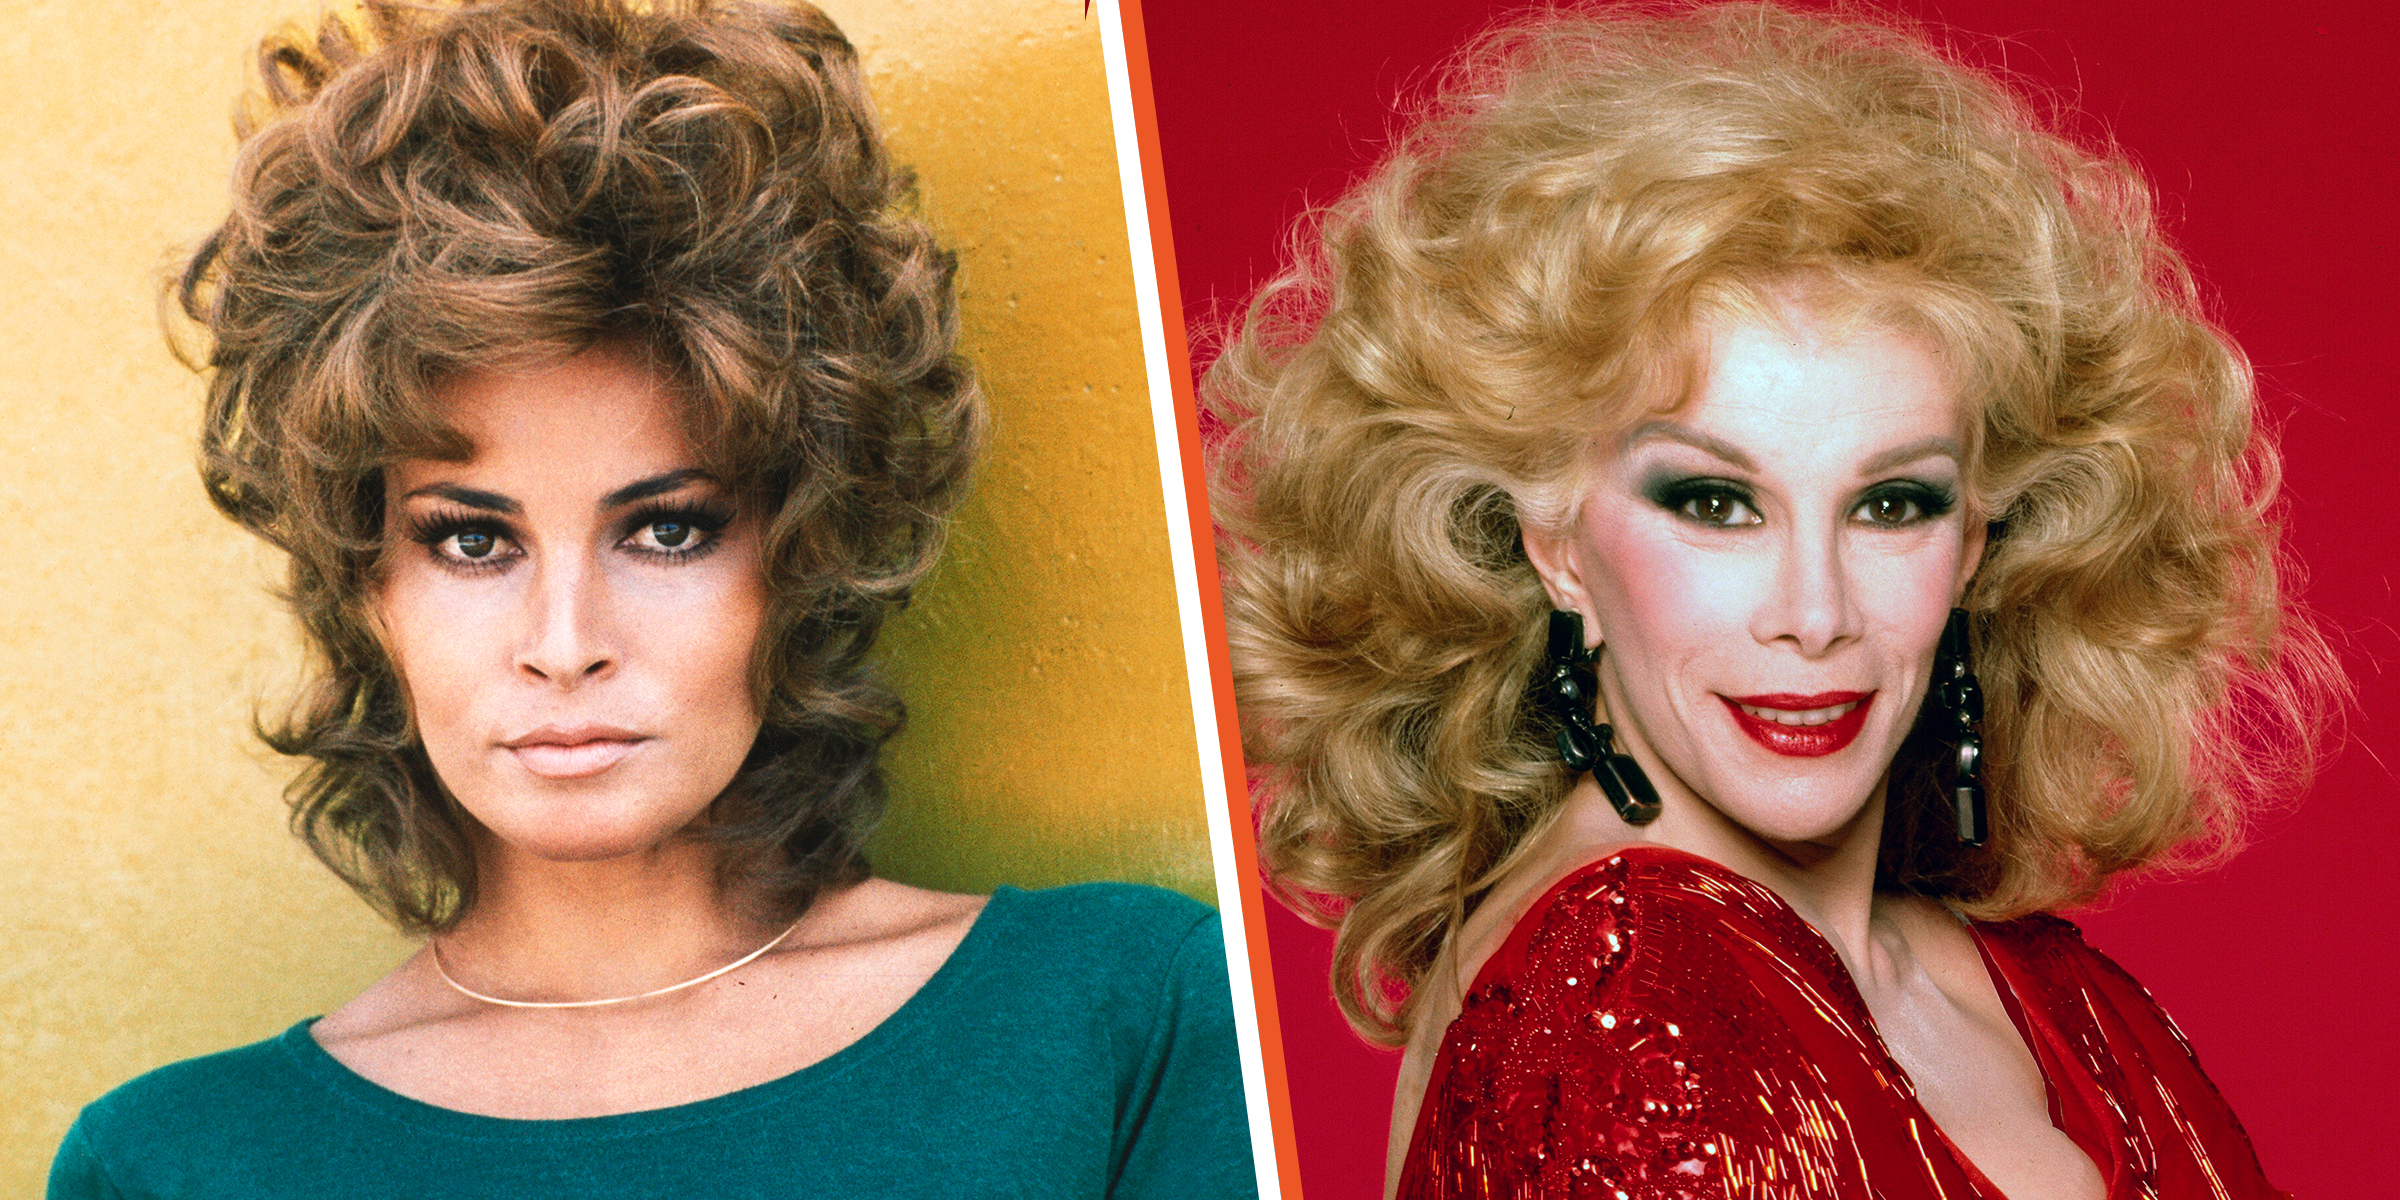 Raquel Welch | Joan Rivers | Source: Getty Images